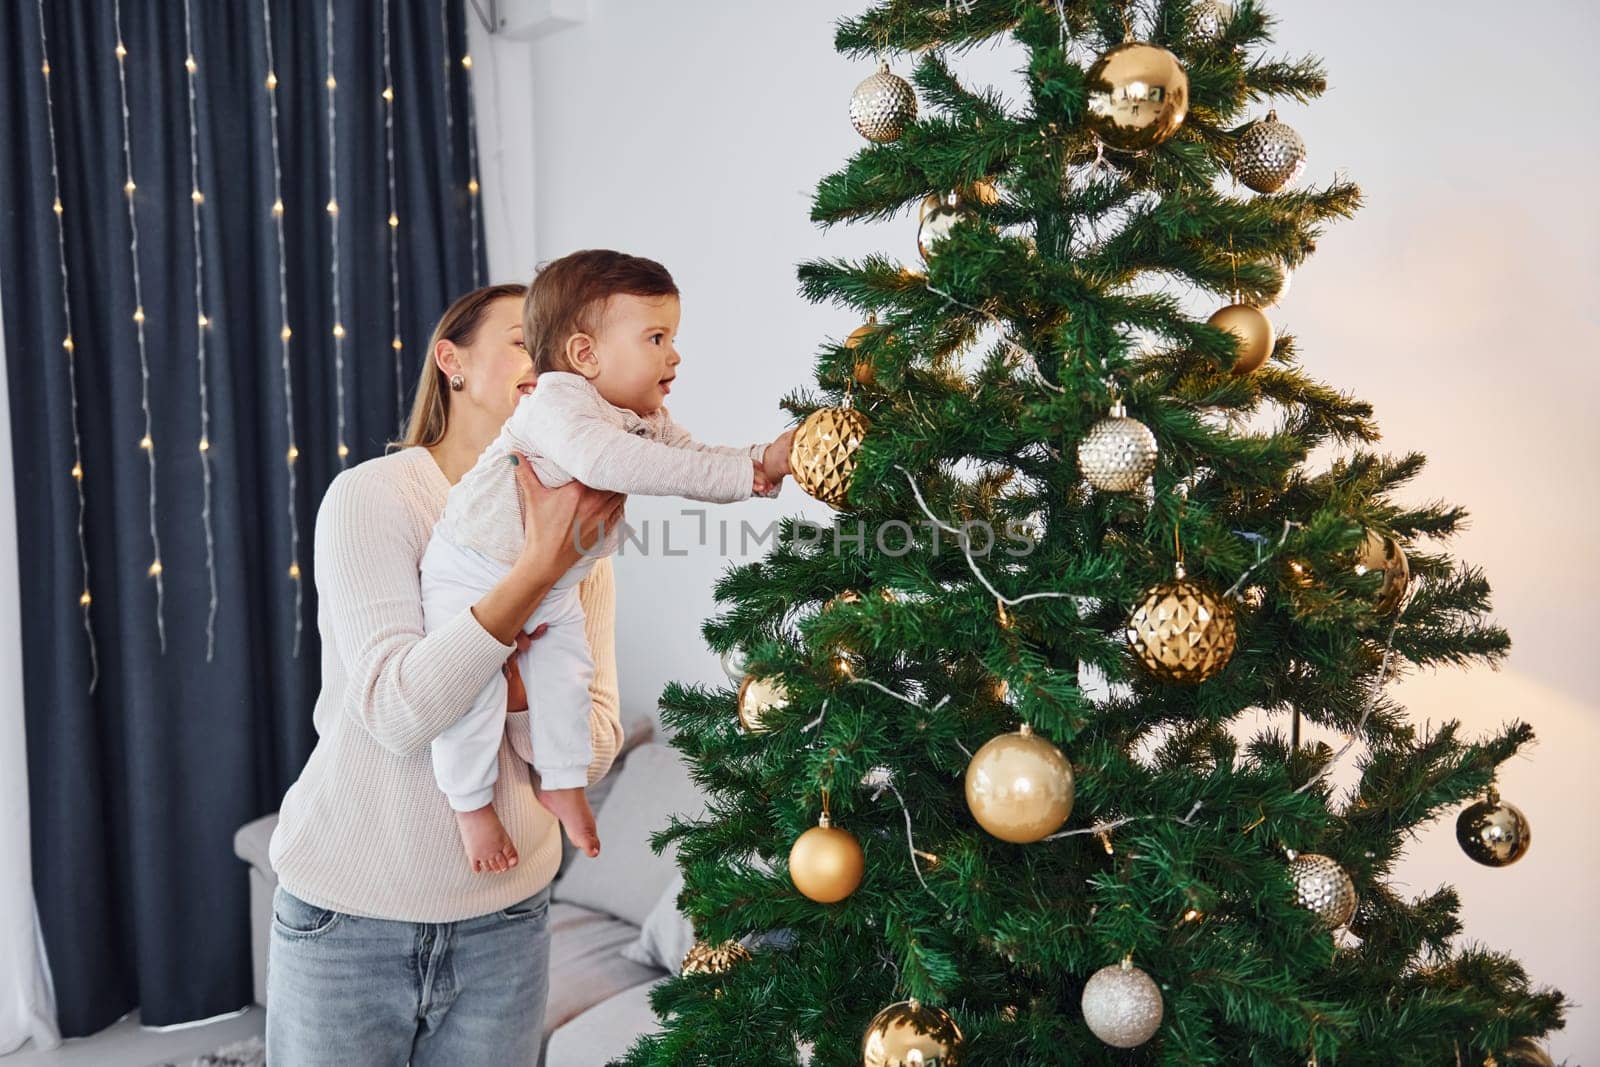 With beautiful tree. Mother with her little daughter is indoors at home together.